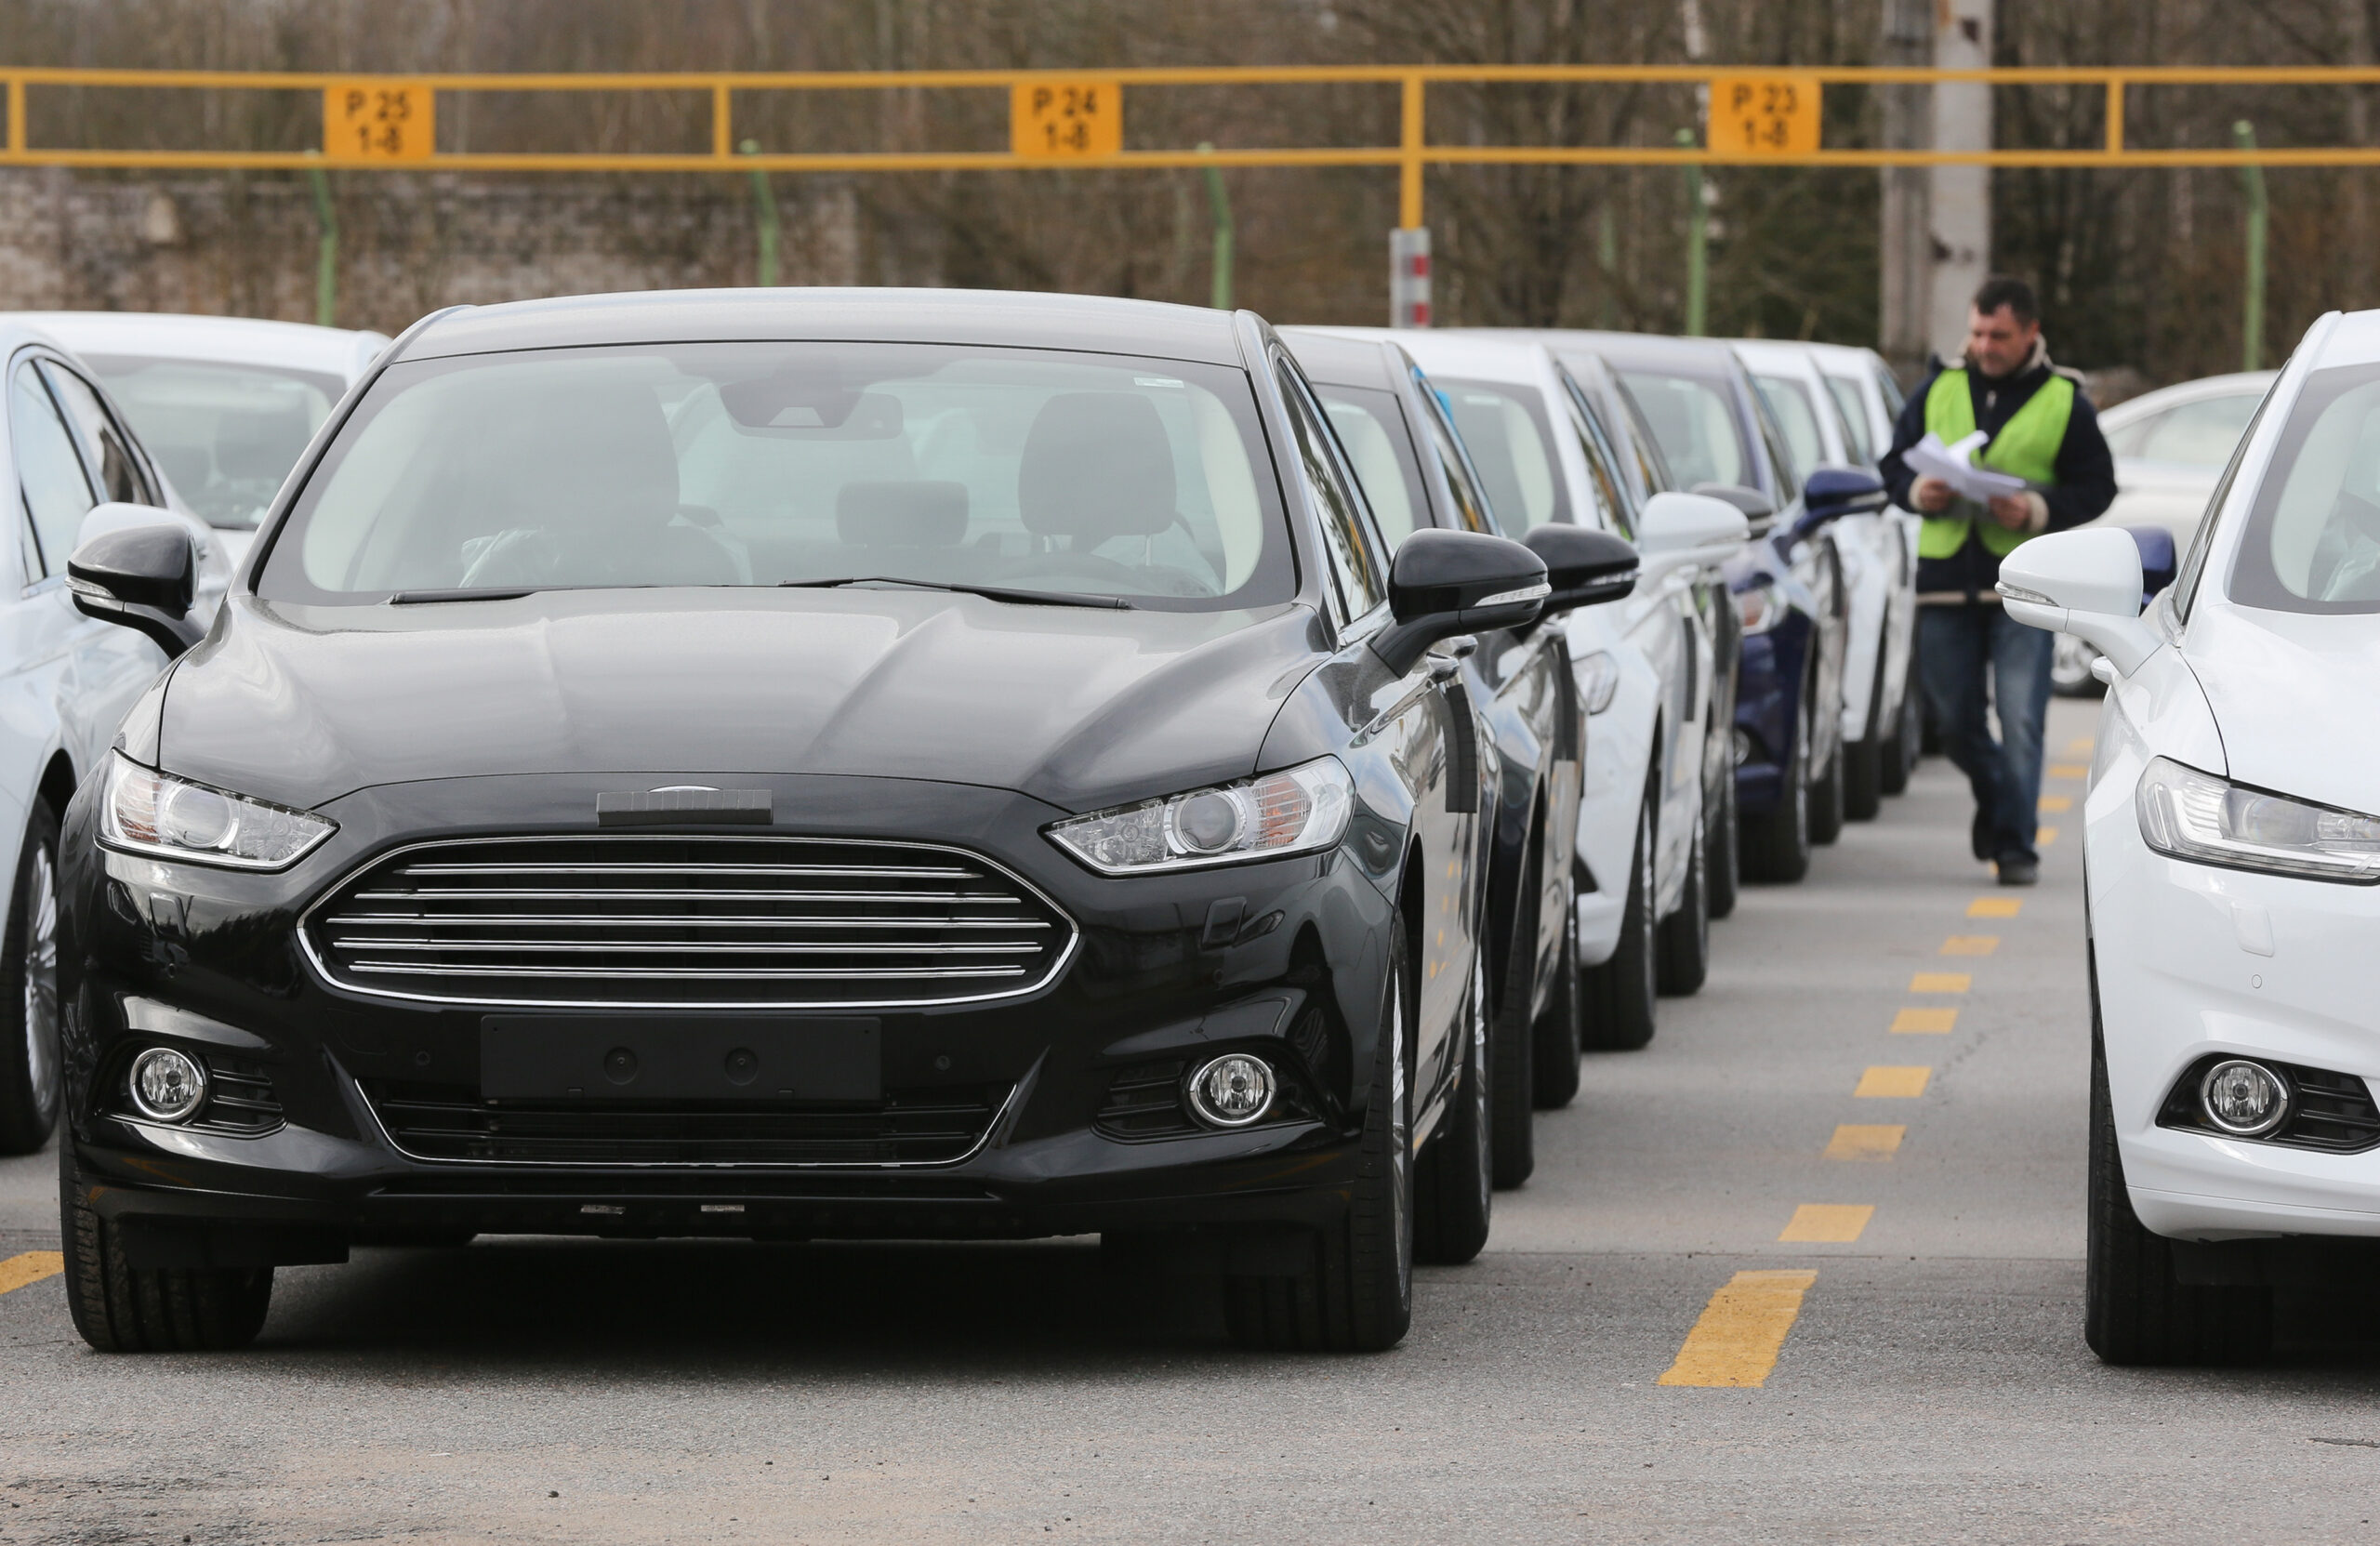 Ford Submits Patent For Car That Repossesses Itself Or Locks Drivers Out Of Features If Payments Missed